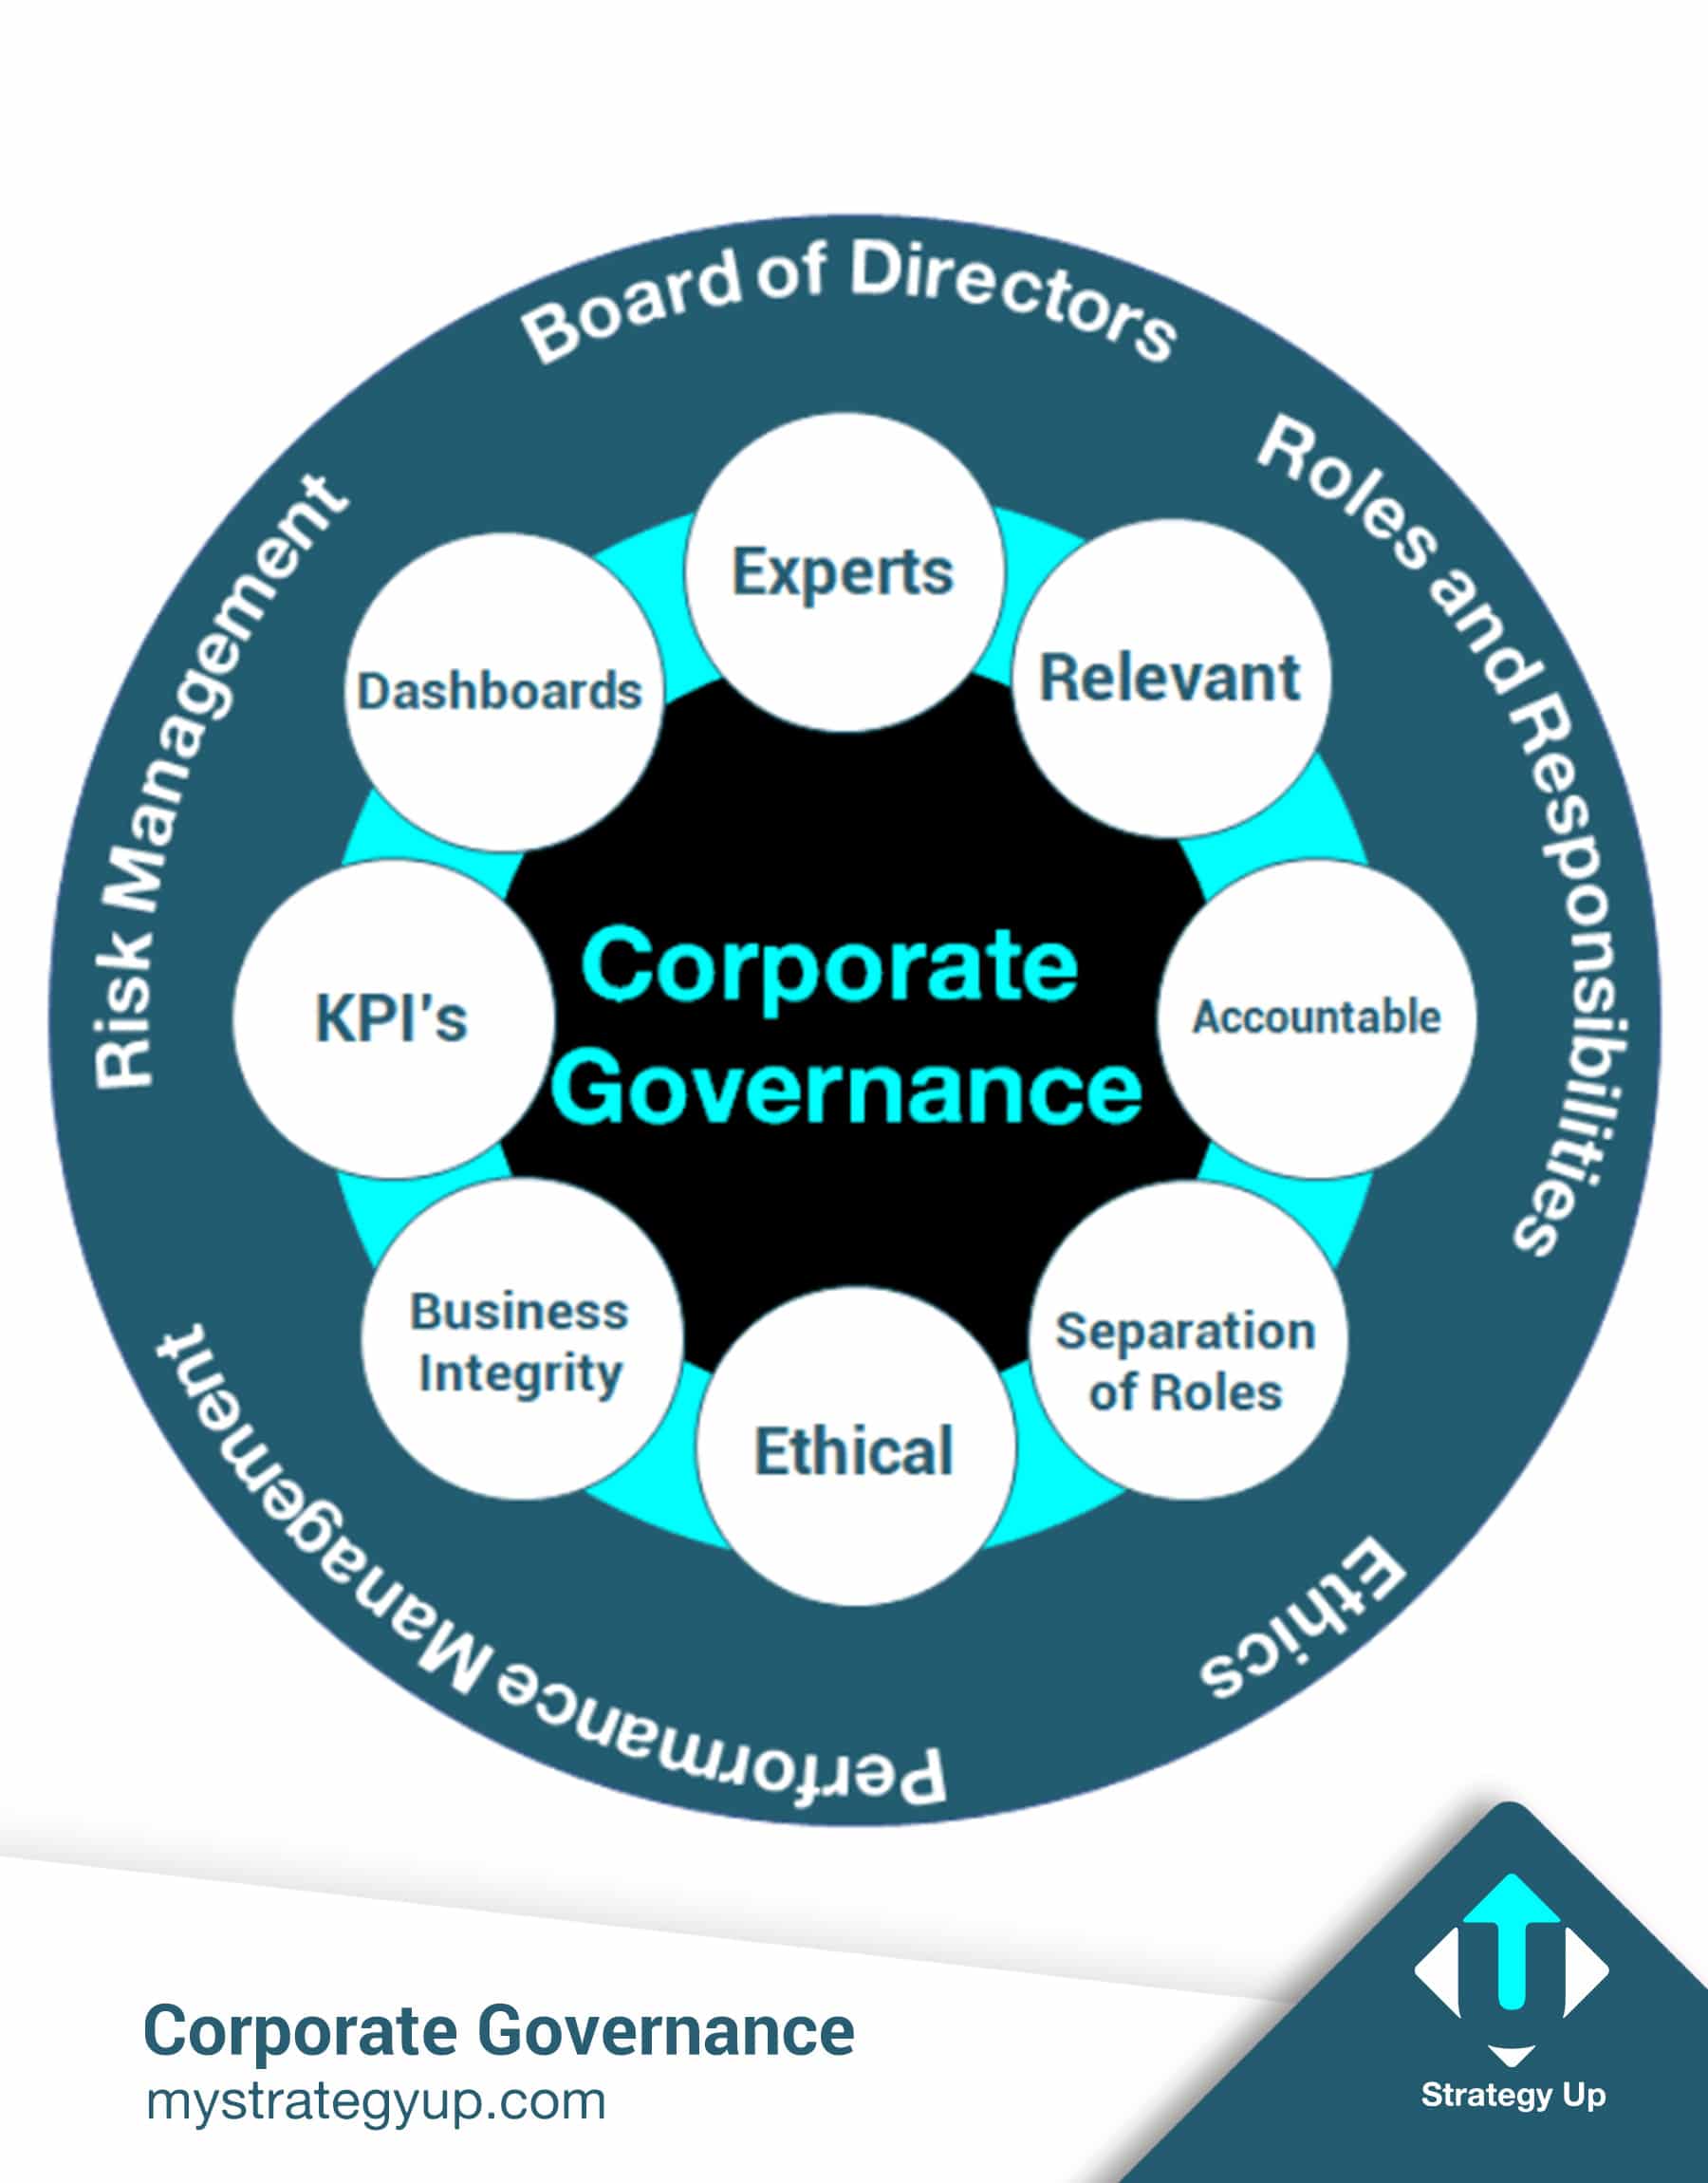 research topics corporate governance